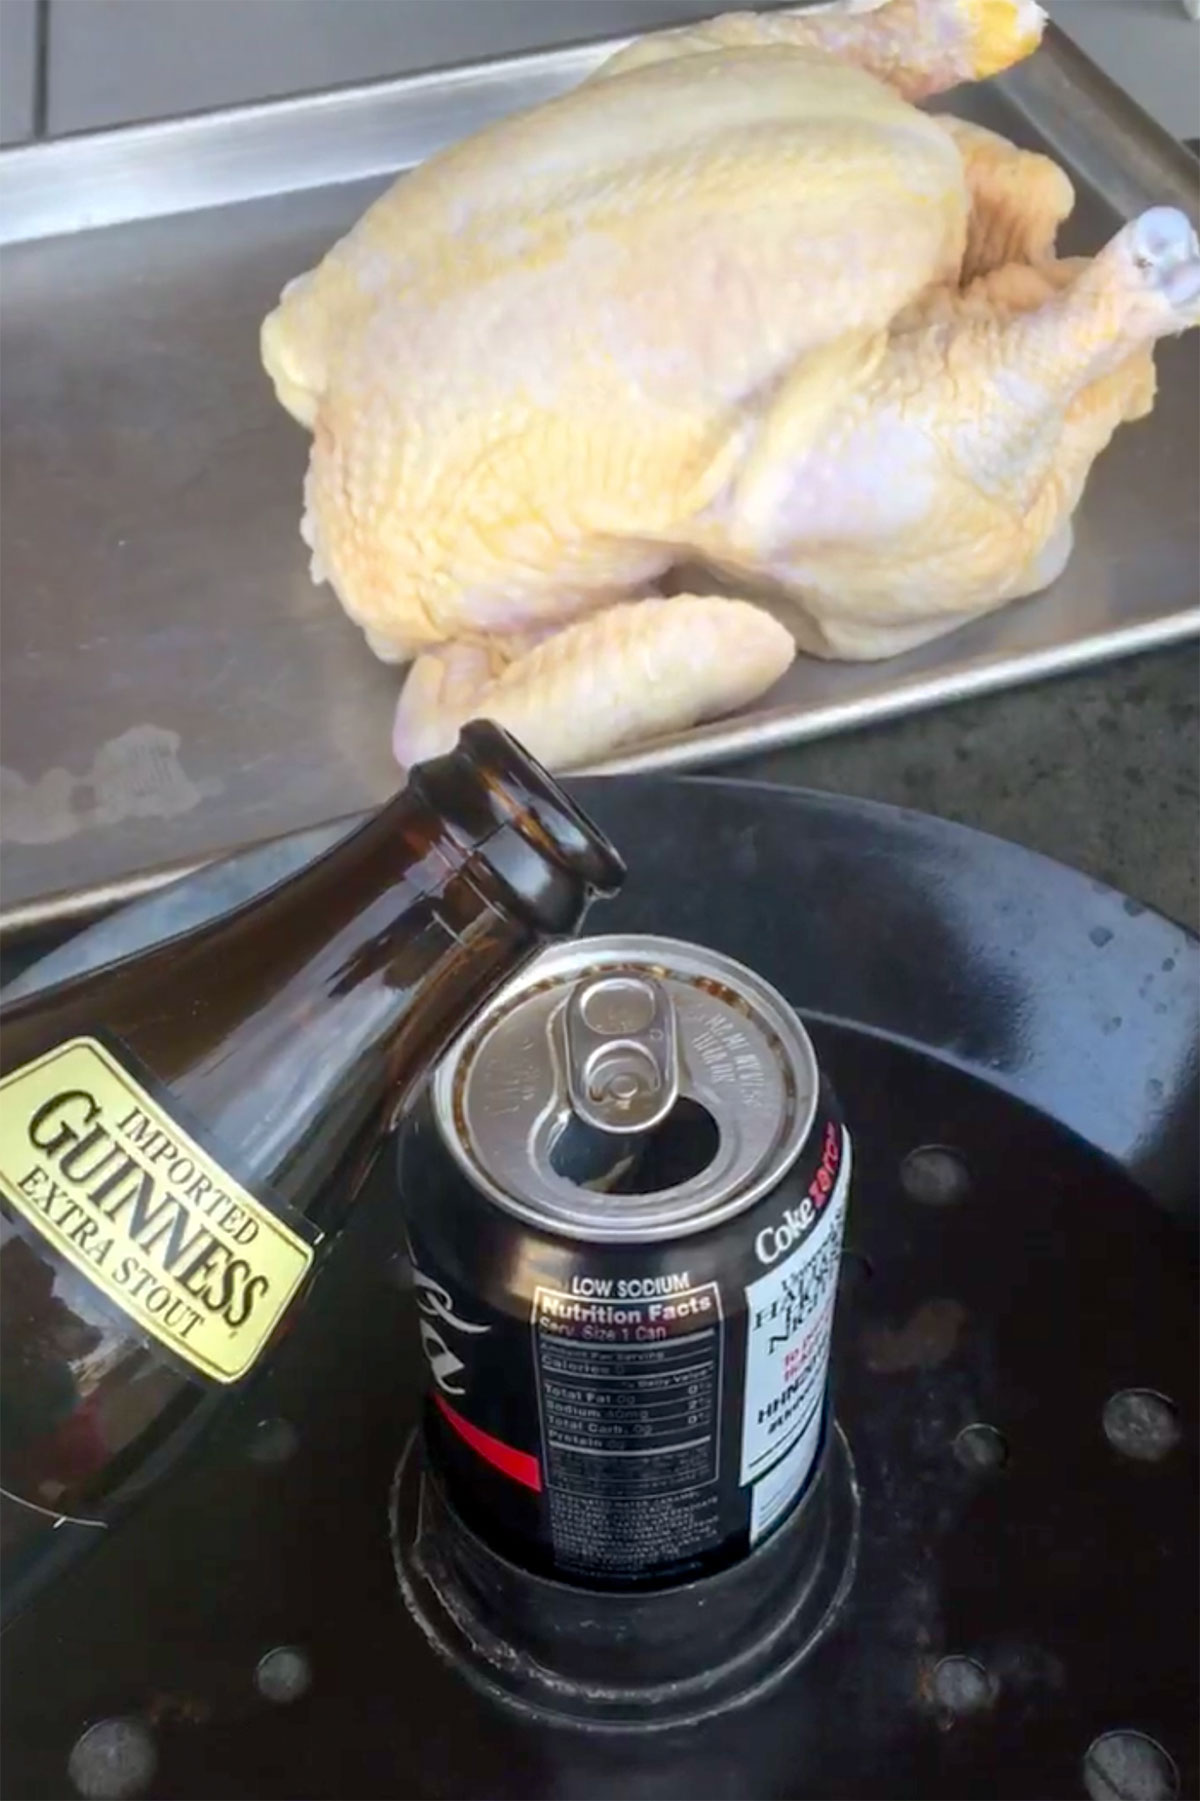 Pouring bottle of Guinness into empty soda can.